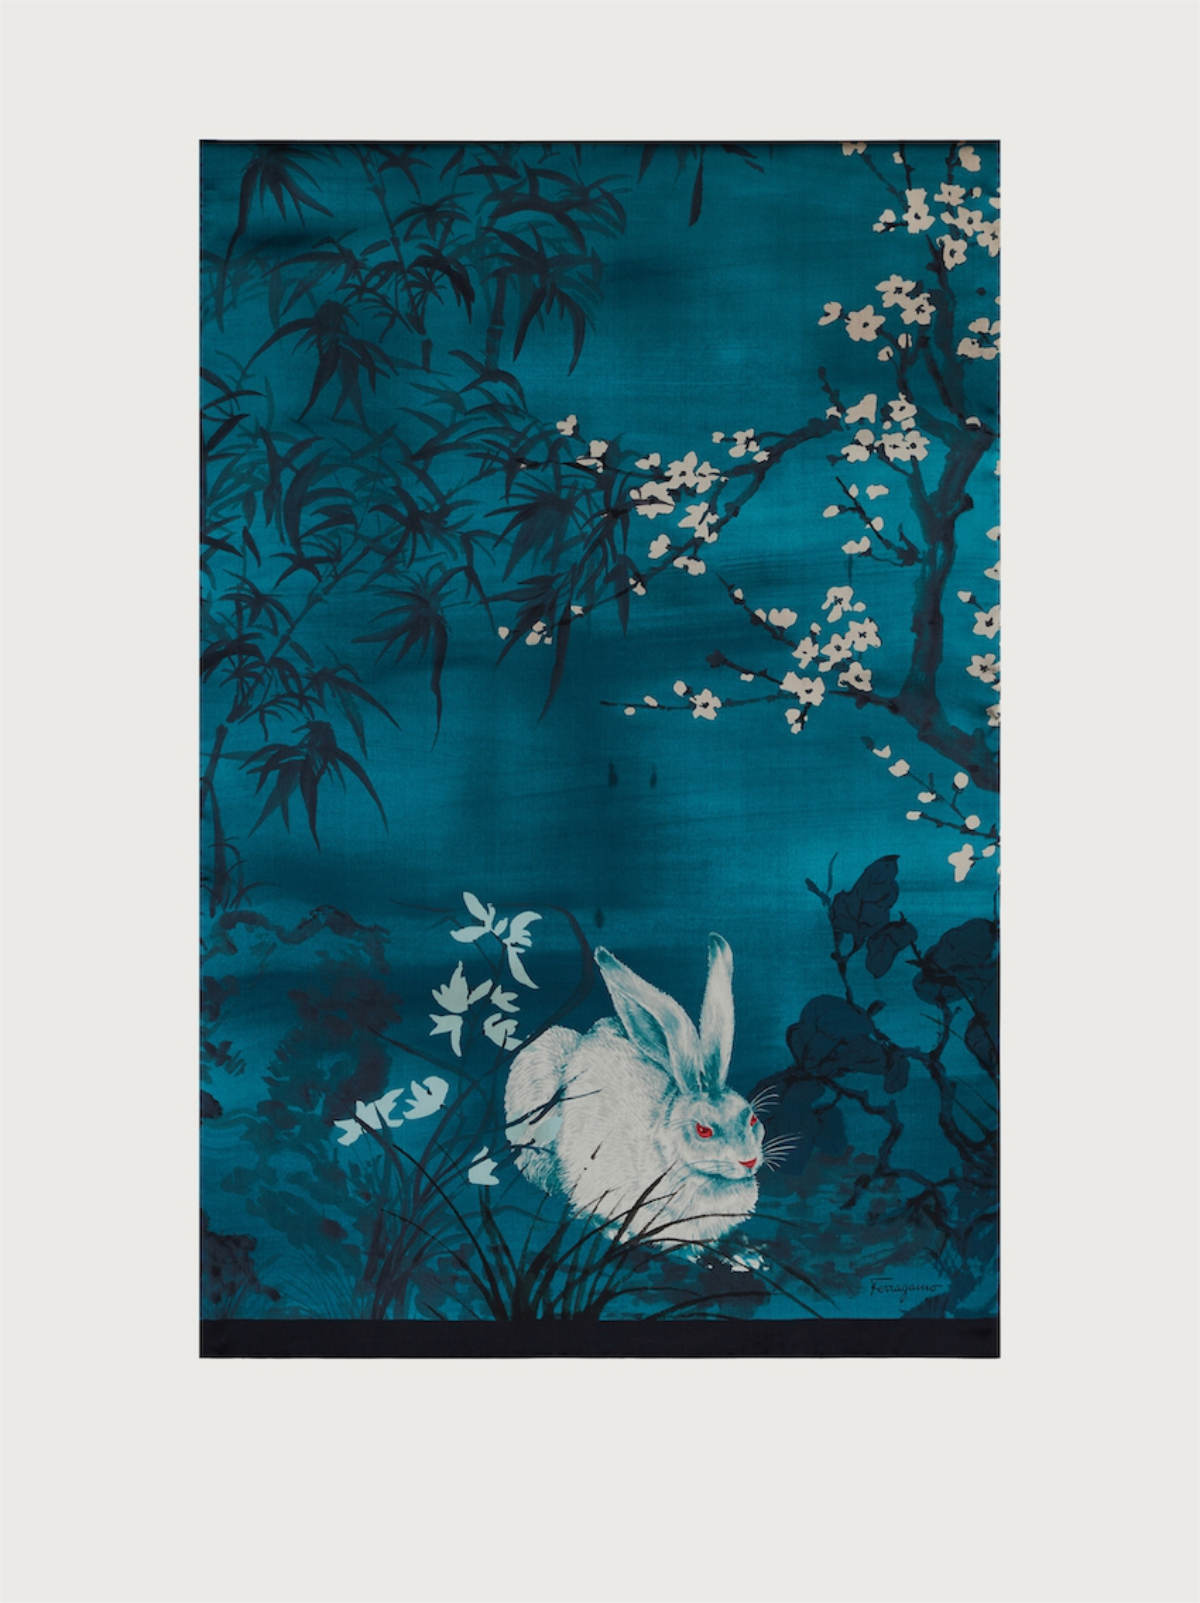 Ferragamo Celebrates The Lunar New Year With An Exclusive Capsule Featuring The Auspicious Rabbit